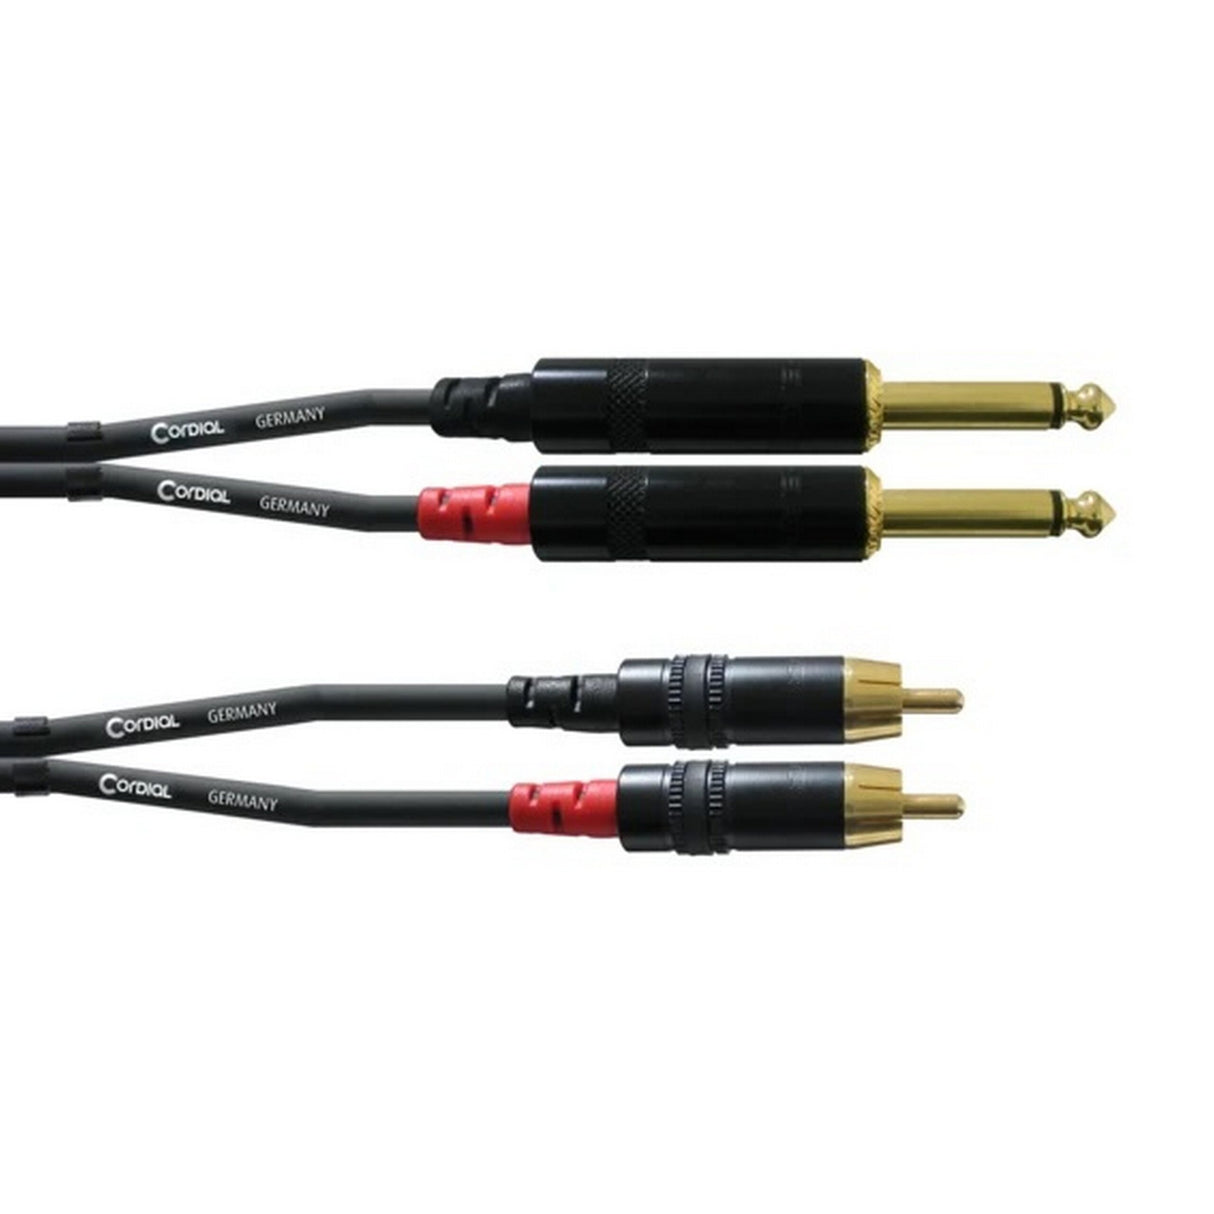 Cordial CFU 0.6 PC 2 x 1/4-Inch to 2 x RCA Twin Cable/Adapter, Black, 2-Feet